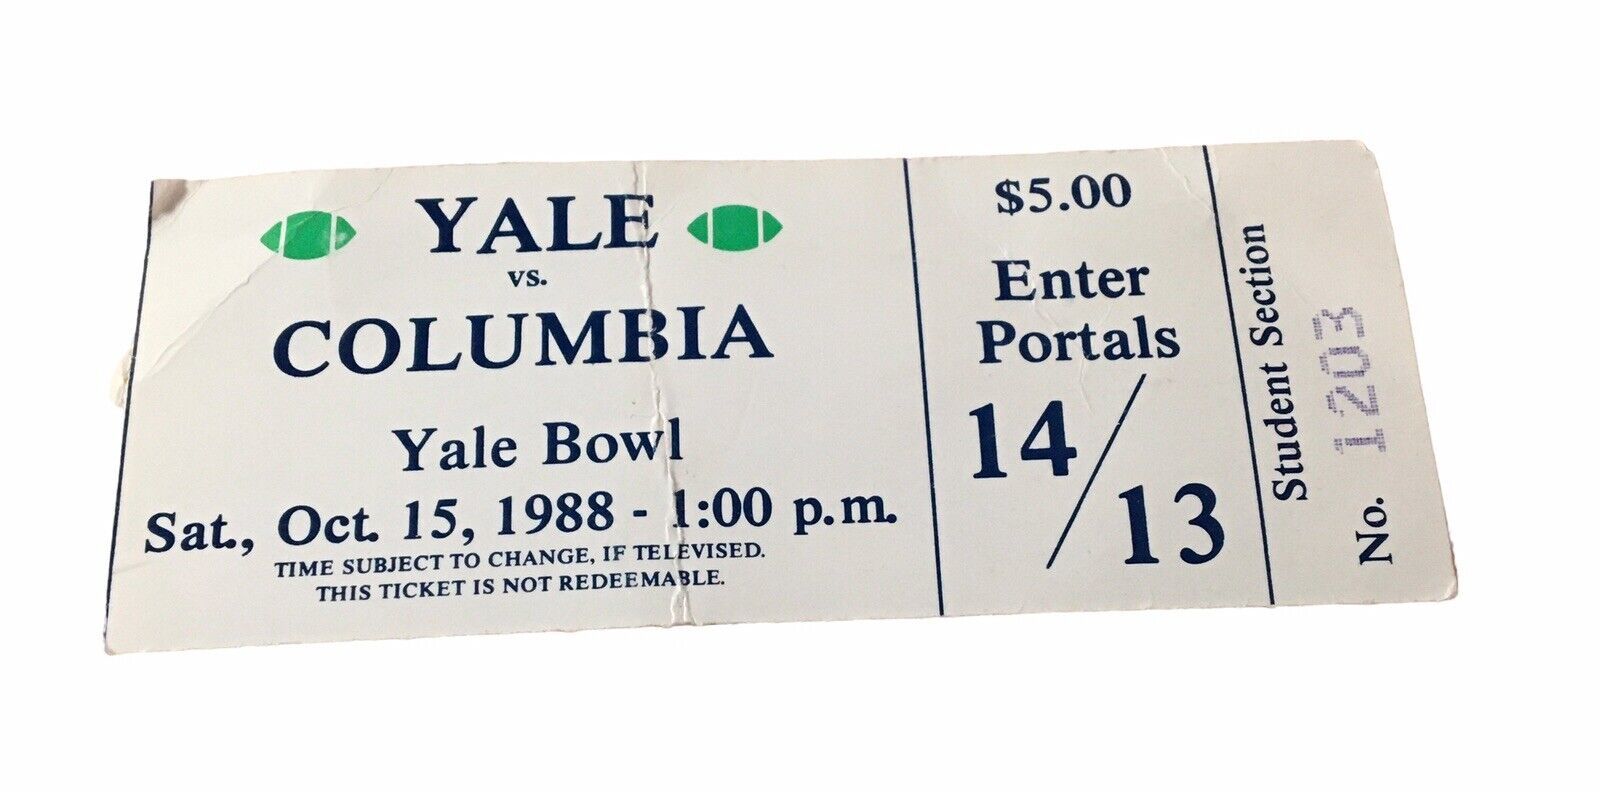 OCTOBER 15 1988 YALE BOWL COLUMBIA VS. YALE COLLEGE FOOTBALL TICKET STUB RARE - $285.00